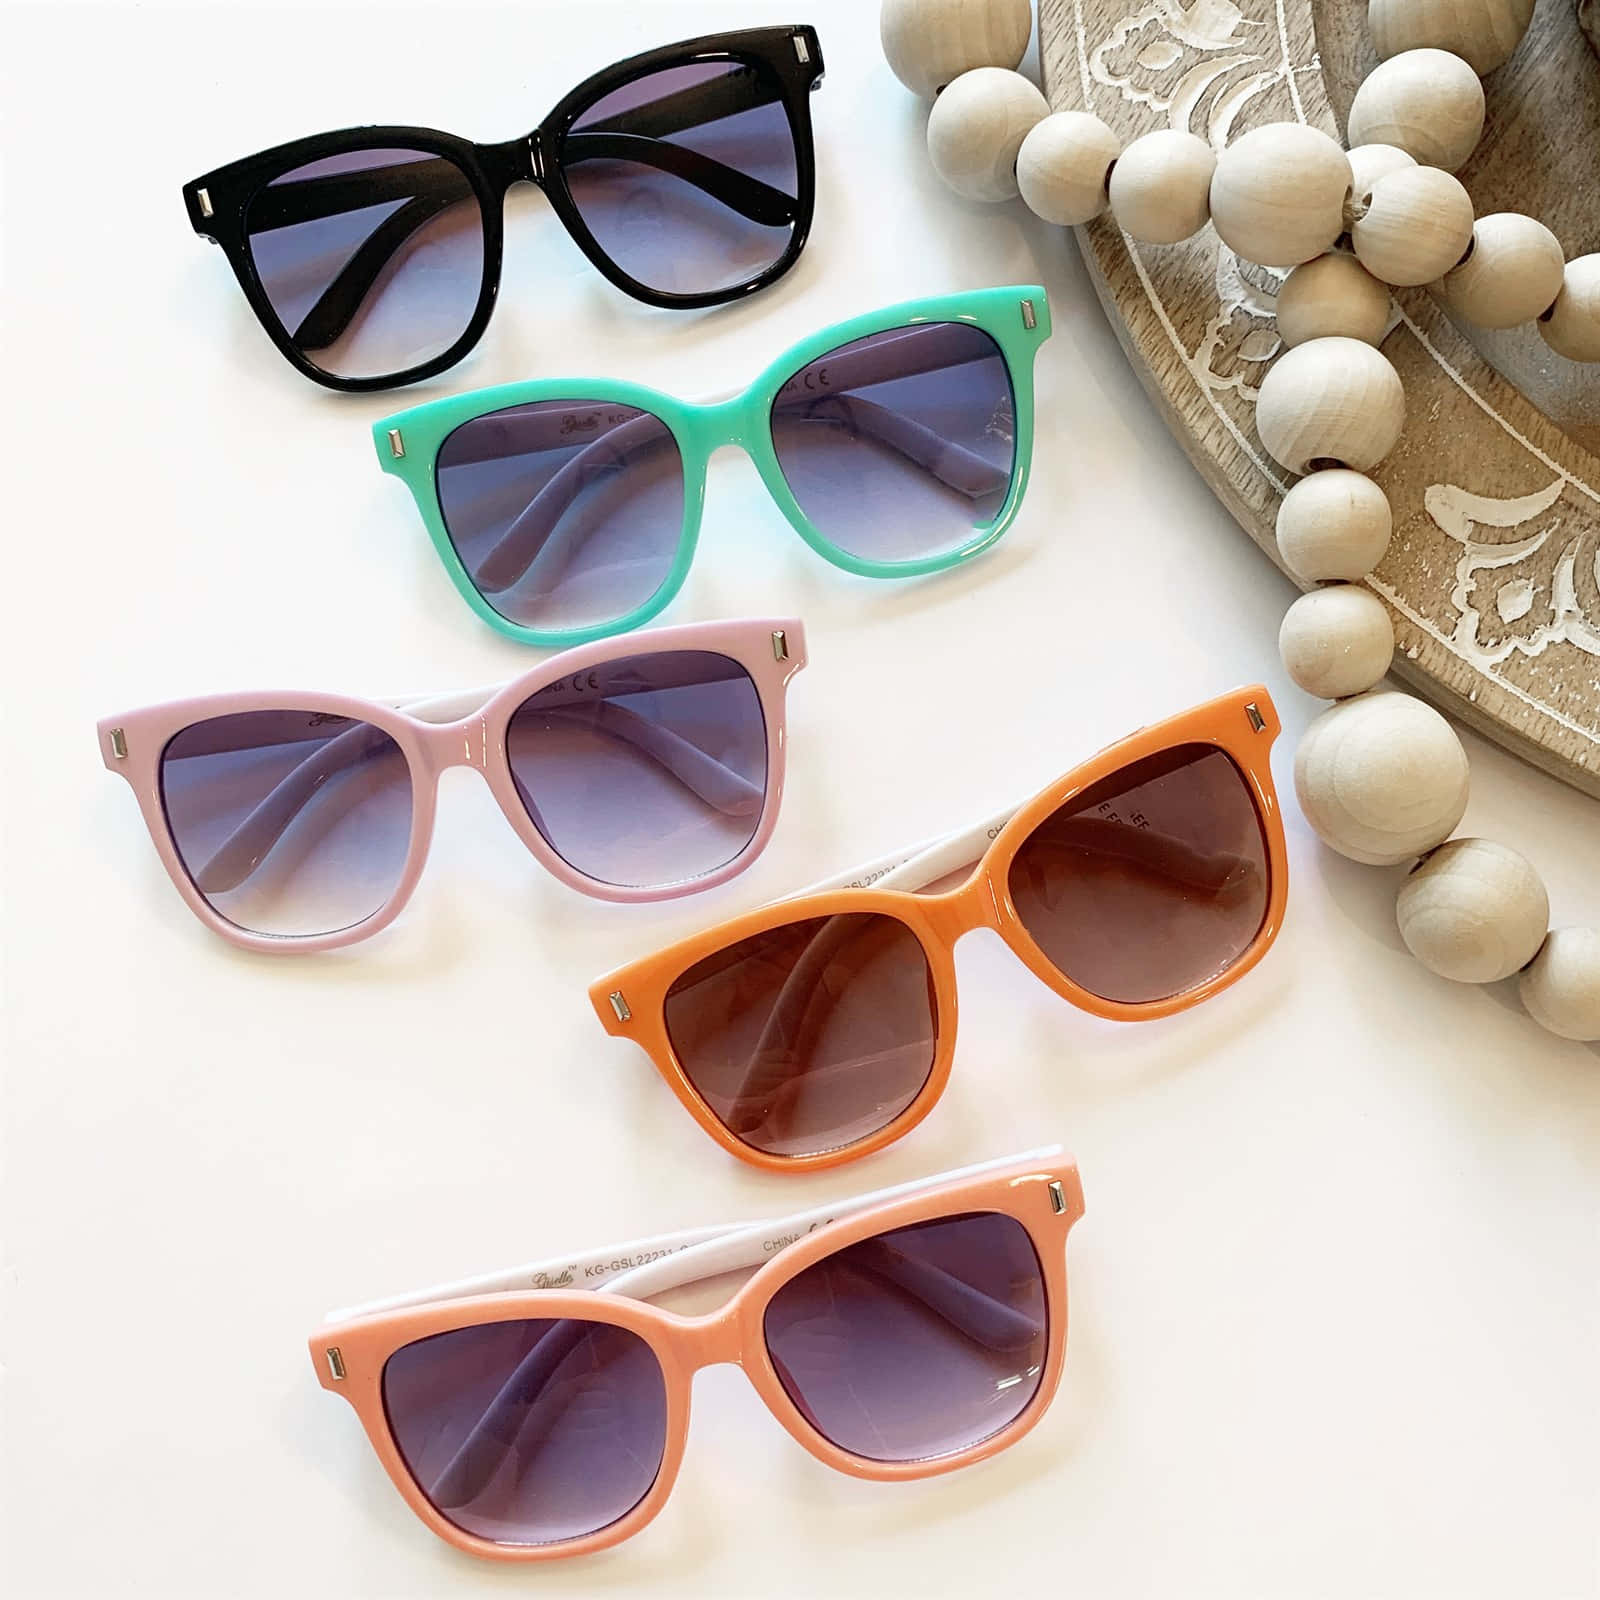 Download A Group Of Sunglasses With Different Colors And Beads ...